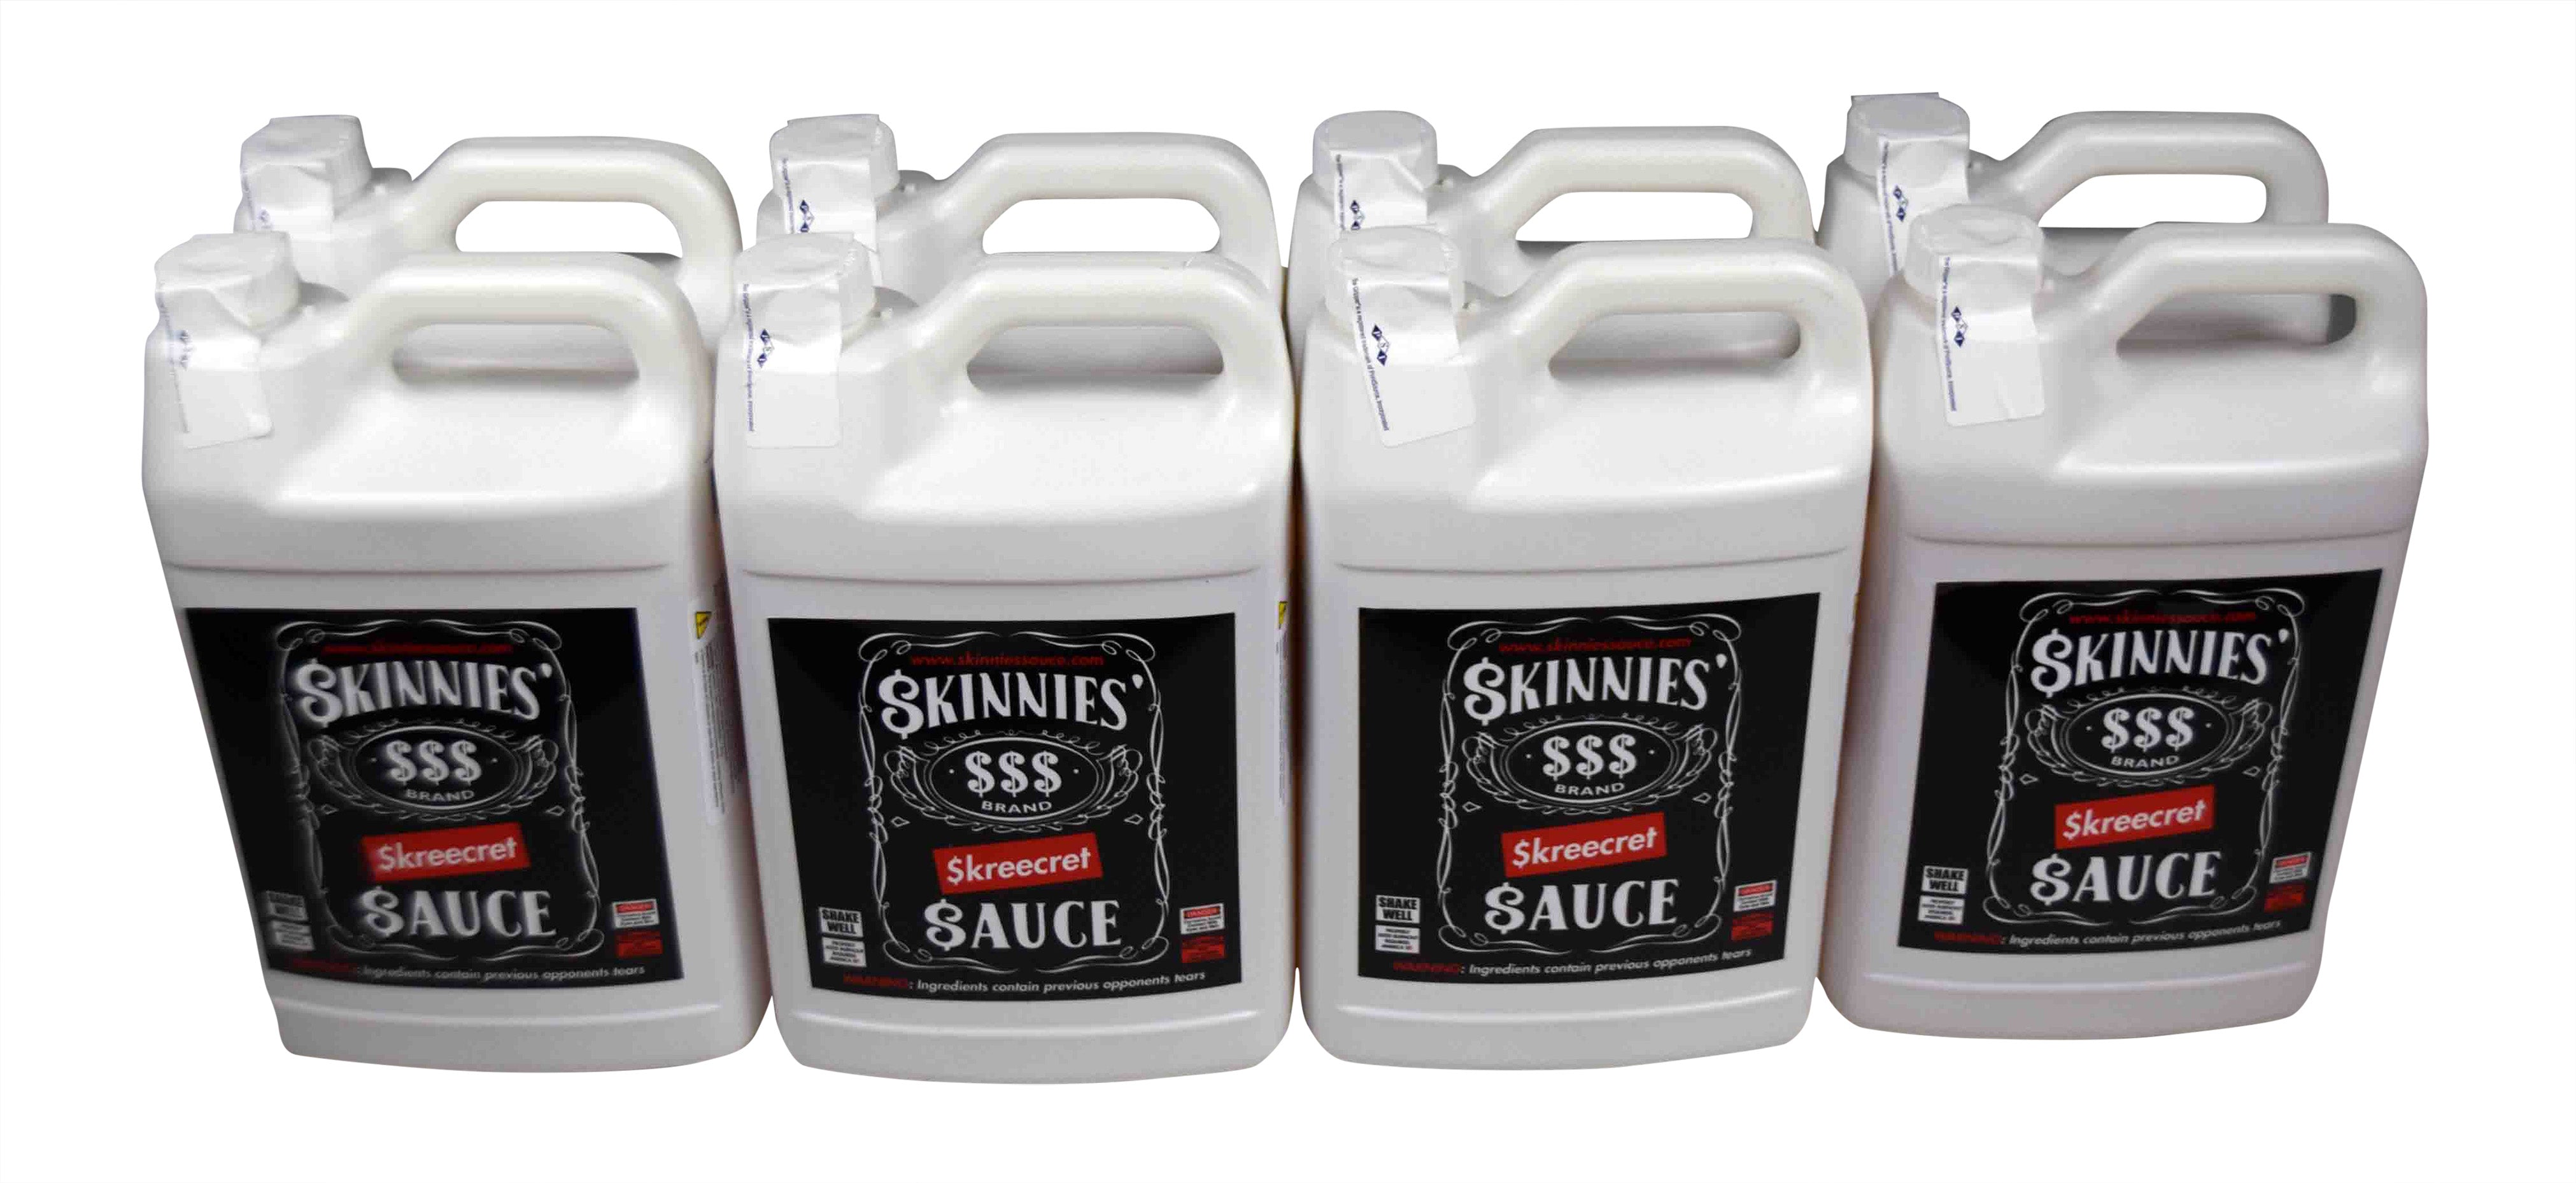 Made-in-USA-Skinnies-Skreecret-Sauce-No-Prep-Traction-8-Pack-image-1